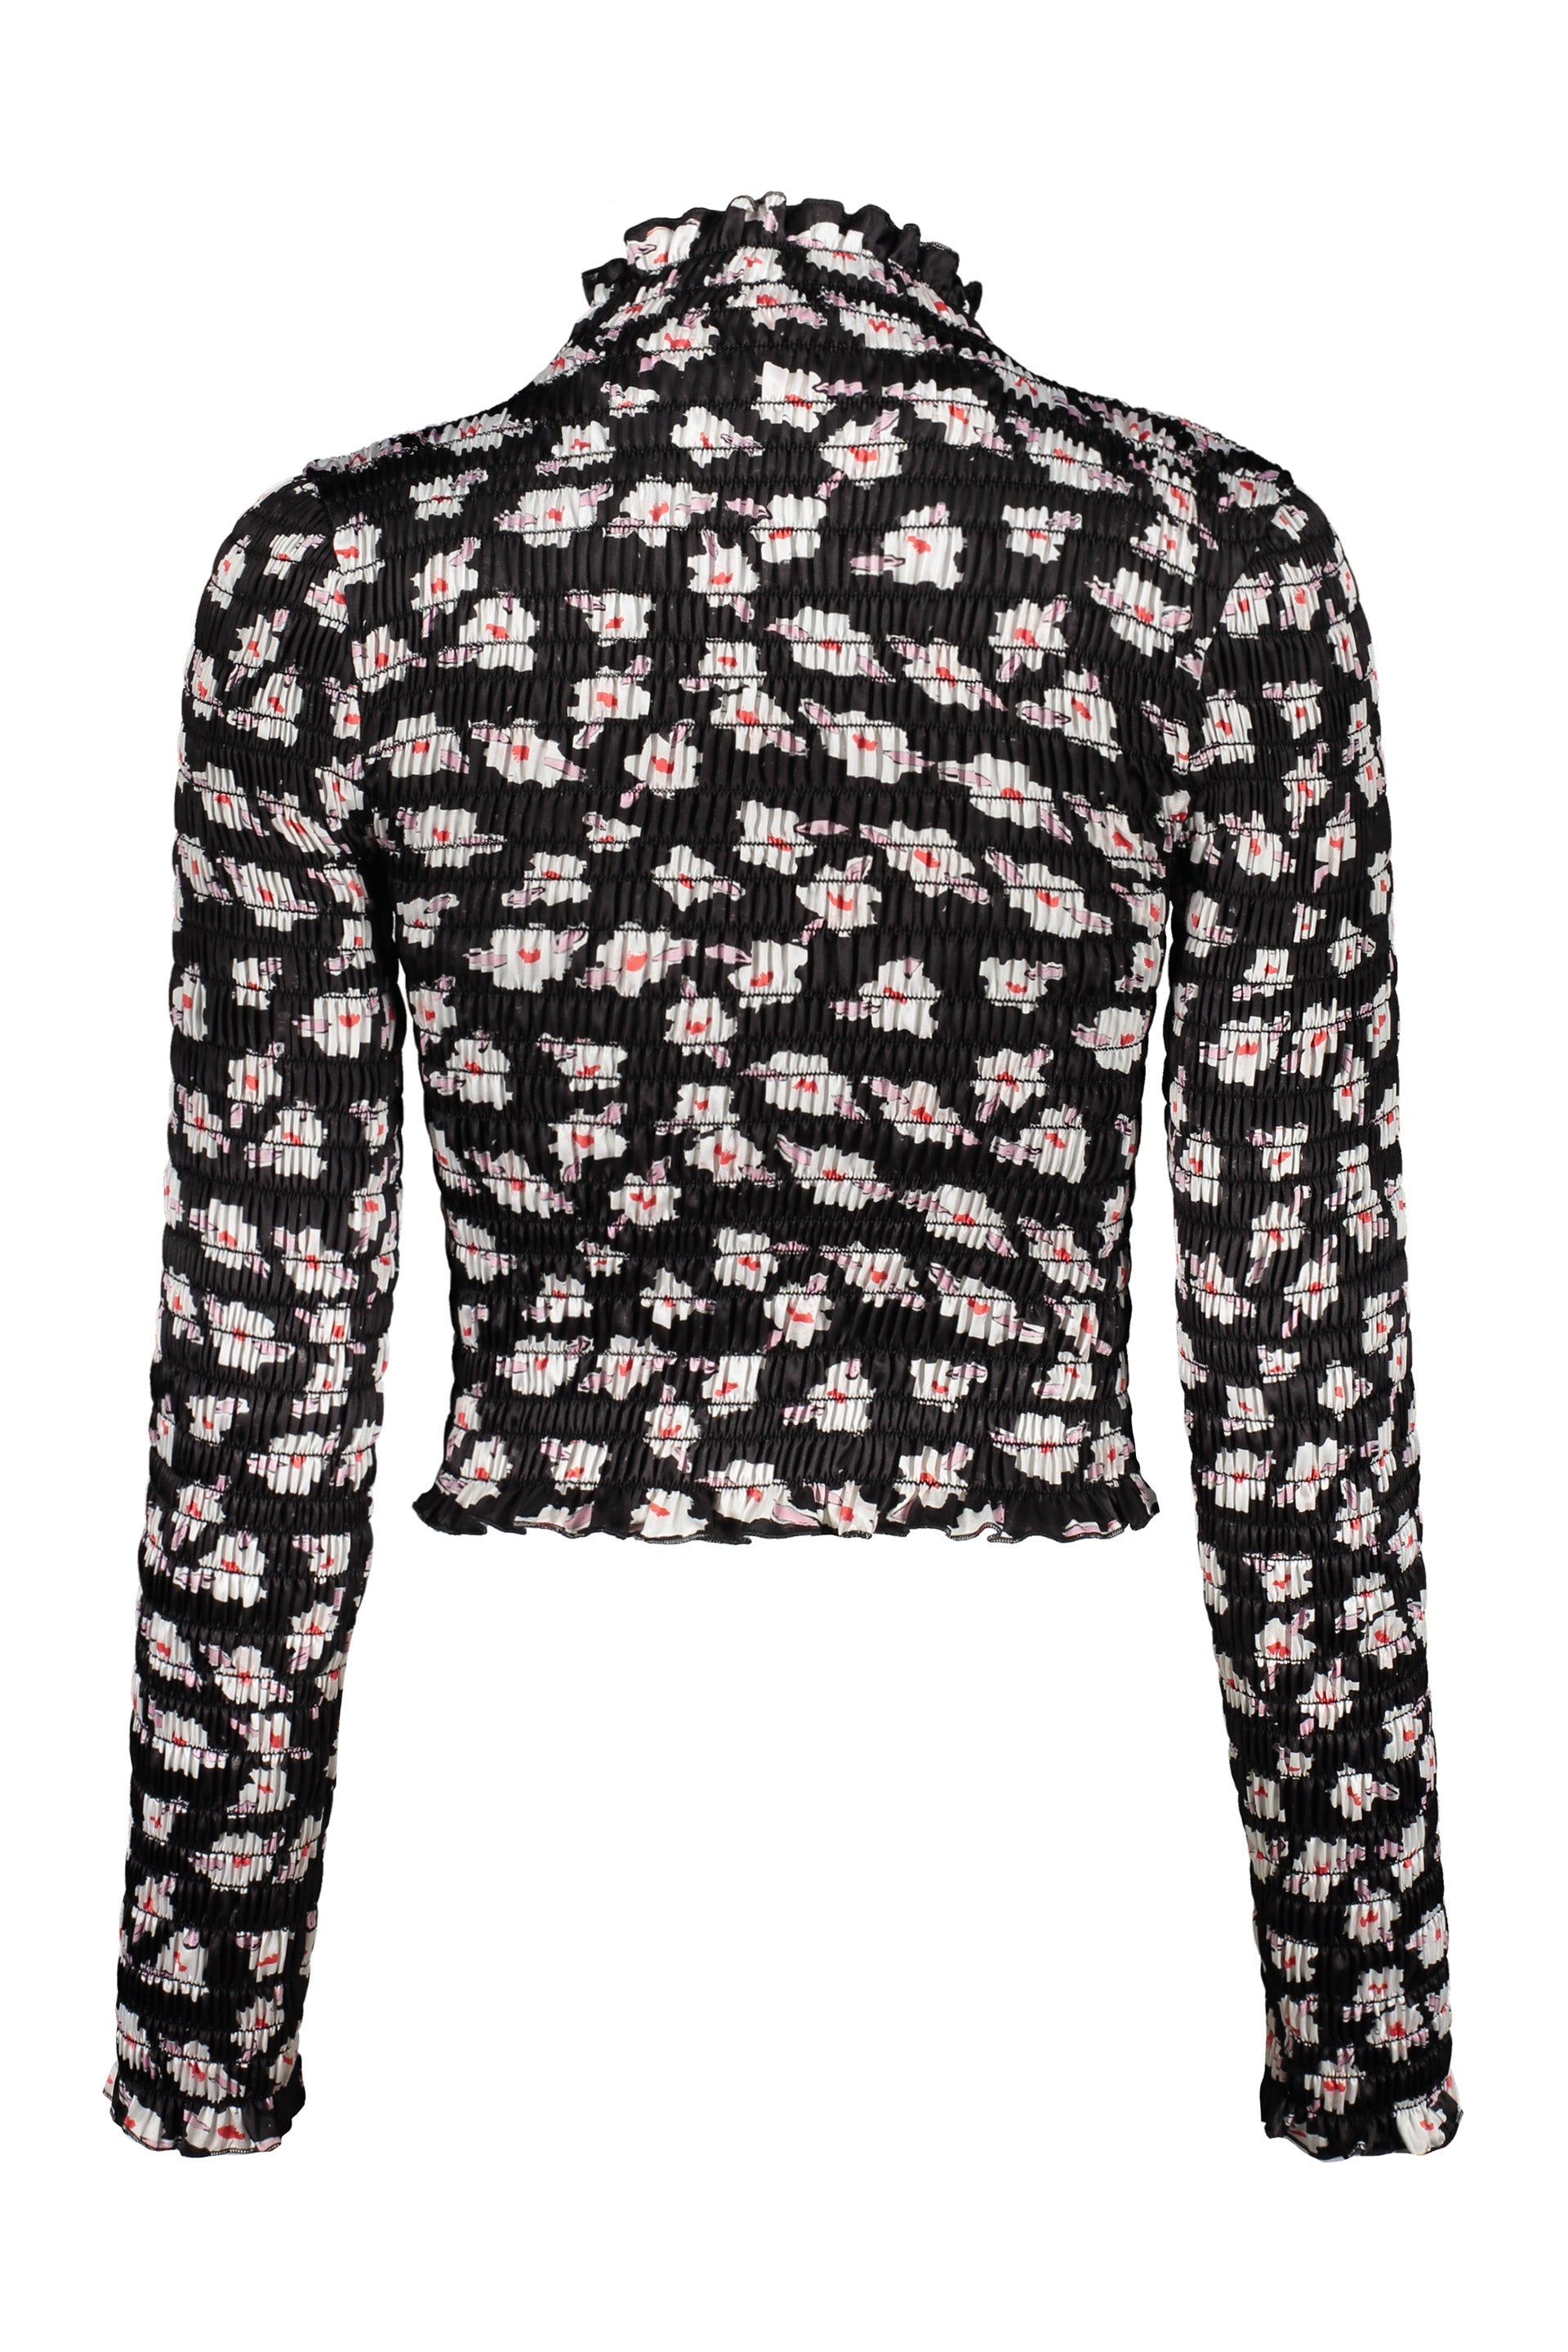 Amy-Crookes-OUTLET-SALE-Printed-long-sleeve-top-Shirts-ARCHIVE-COLLECTION-2.jpg